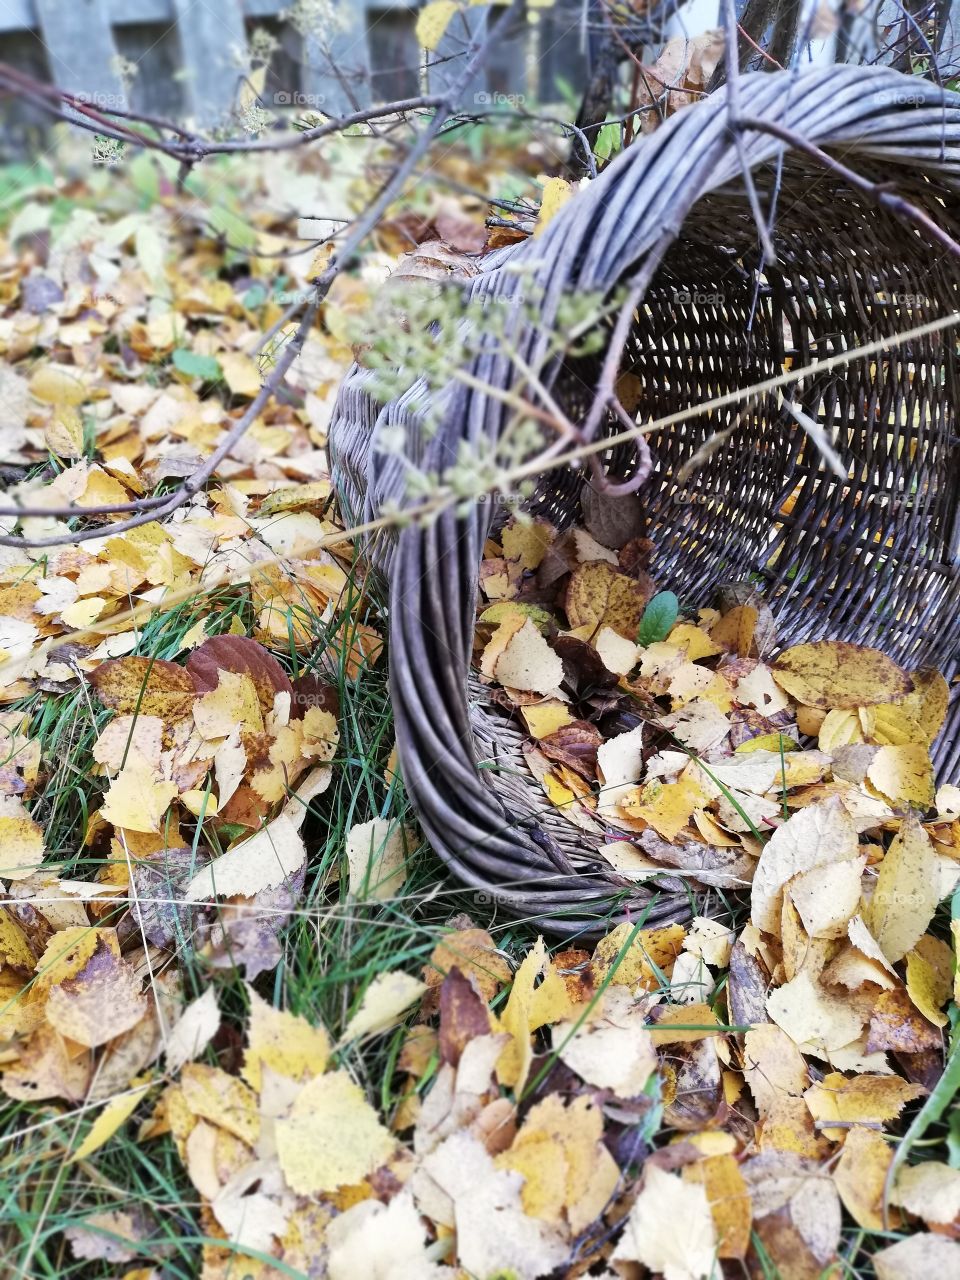 A grey rattan basket on its one side on the ground among the dry fallen leaves of the birch tree and green grass. Some leaves inside the container and a branch hanging above. In the background an unpainted fence.